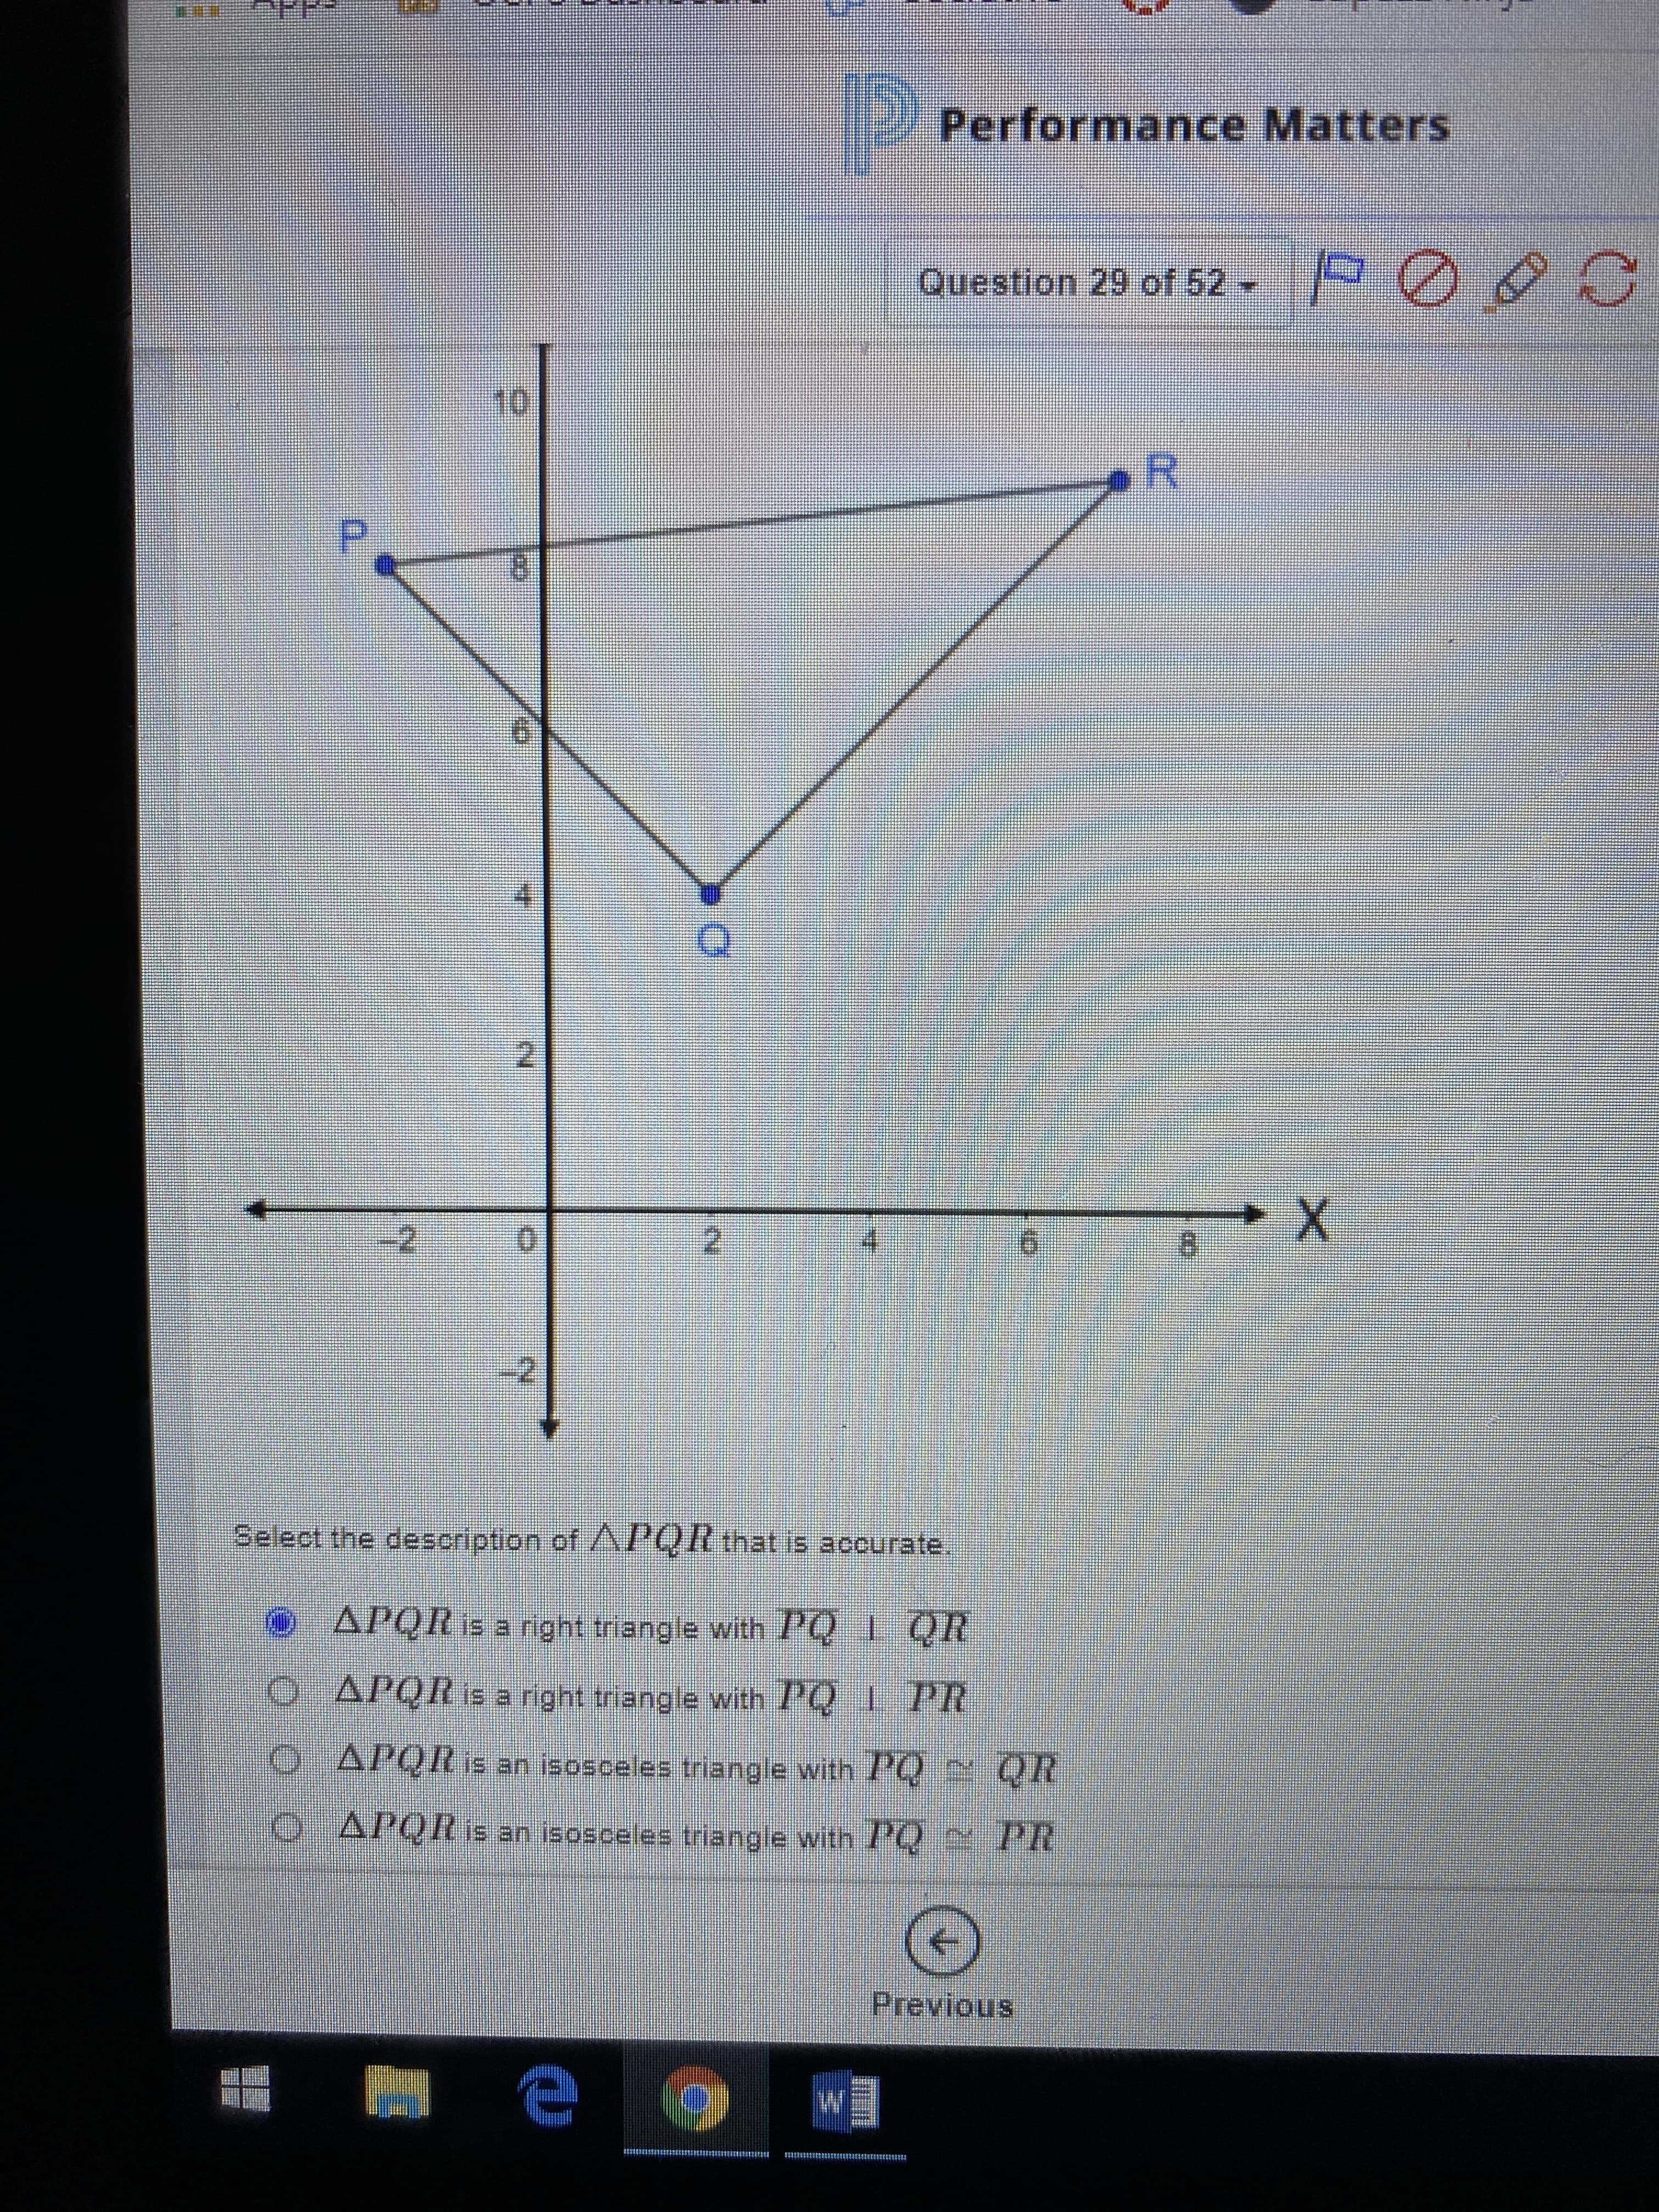 Select the description of APQR that is accurate.
APQRis a nght triangle with PQ 1 QR
OAPQRIS a right triangle with I'Q 1PR
O APQRIS an isosceles triangle with PQ 2 QR
O APQR is an isosceles triangle with PQ
PR
